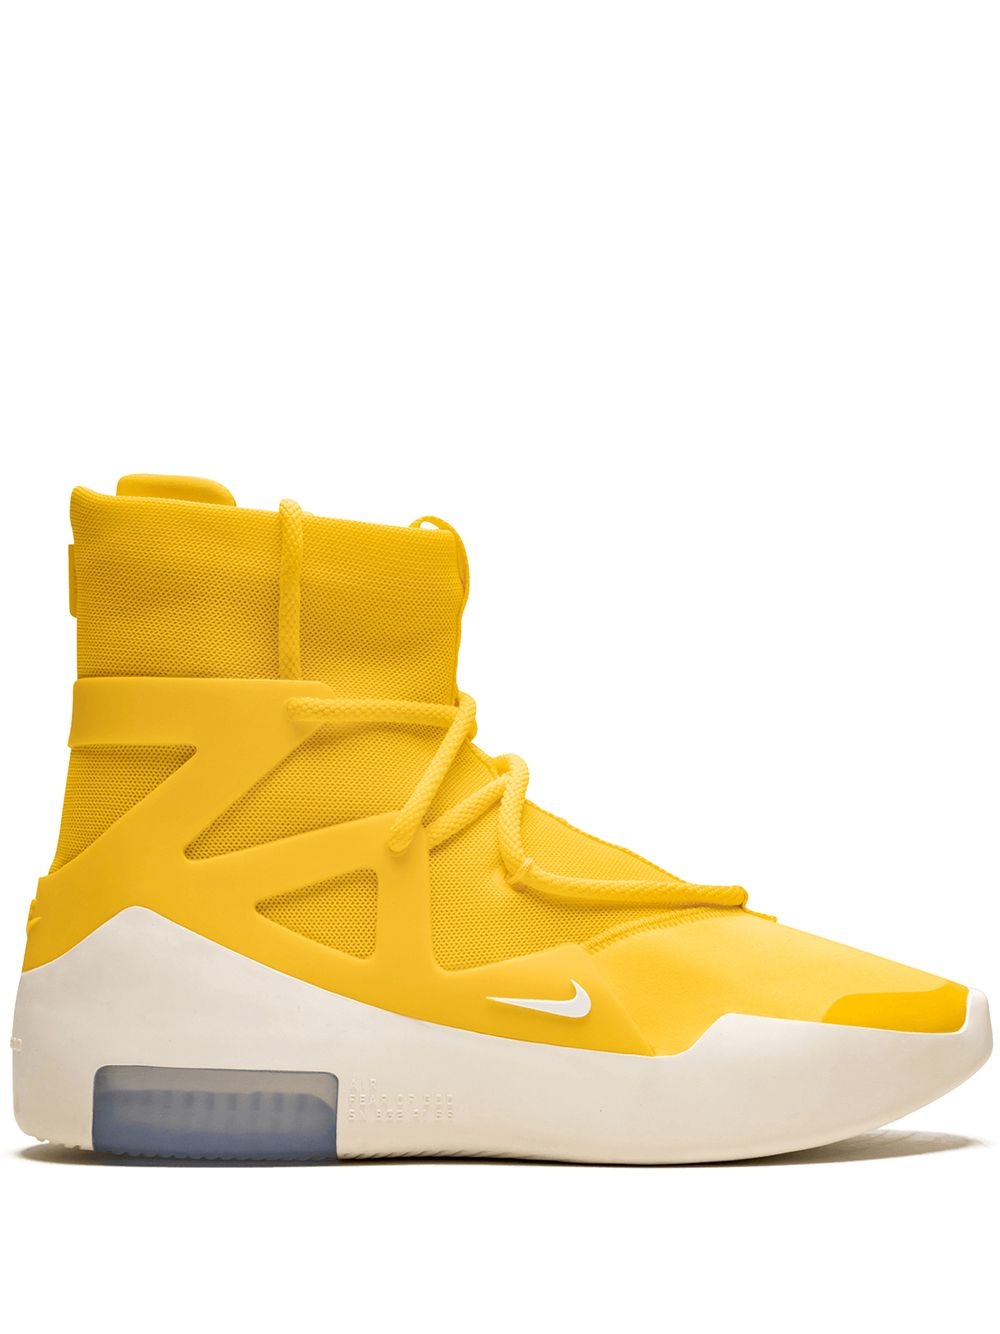 Air Fear Of God 1 "Amarillo" sneakers - 1